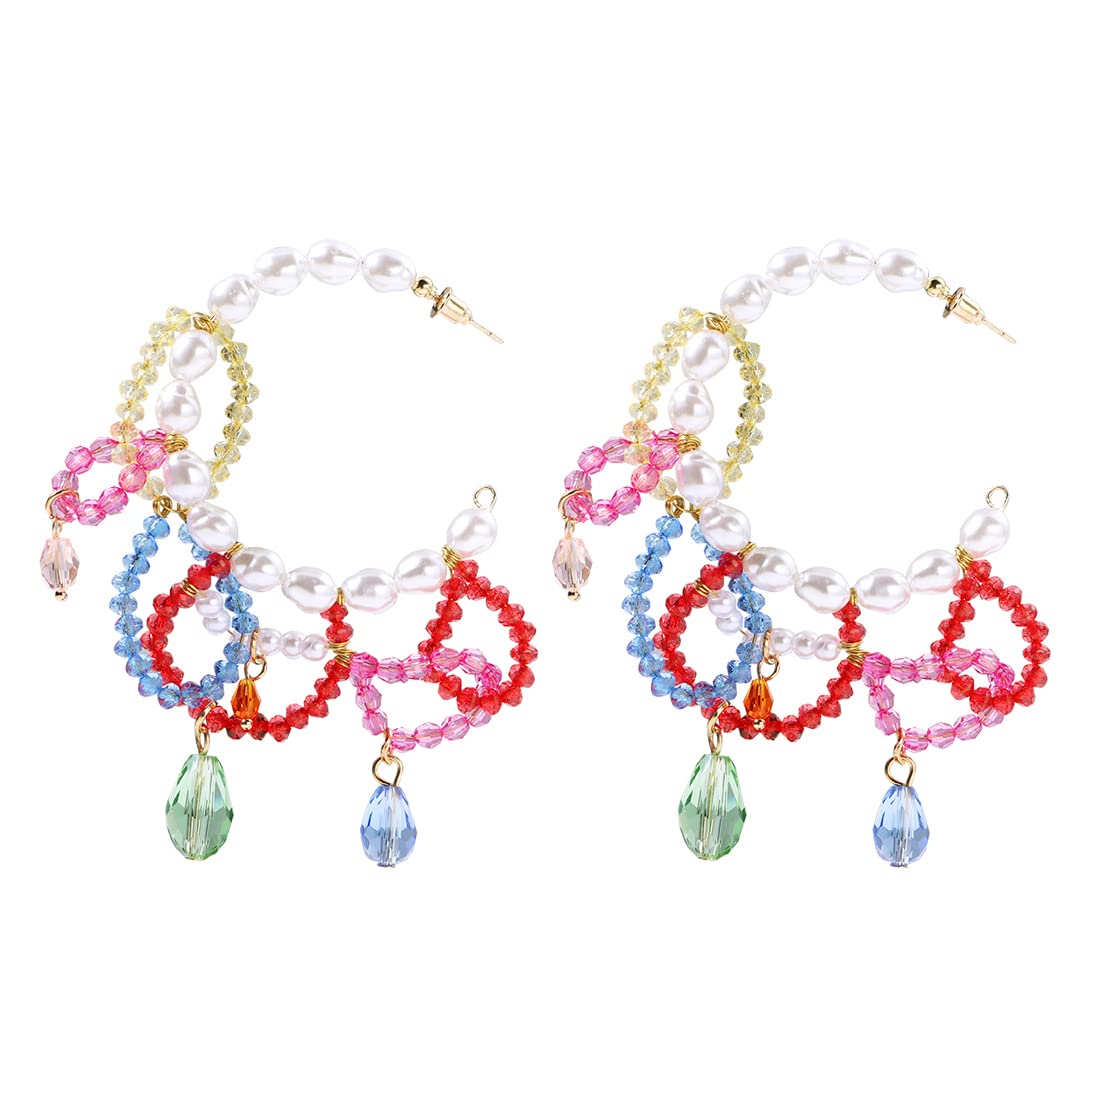 Yellow Chimes Earrings For Women Multicolor Beads Hanging Round Hoop Earrings For Women and Girls